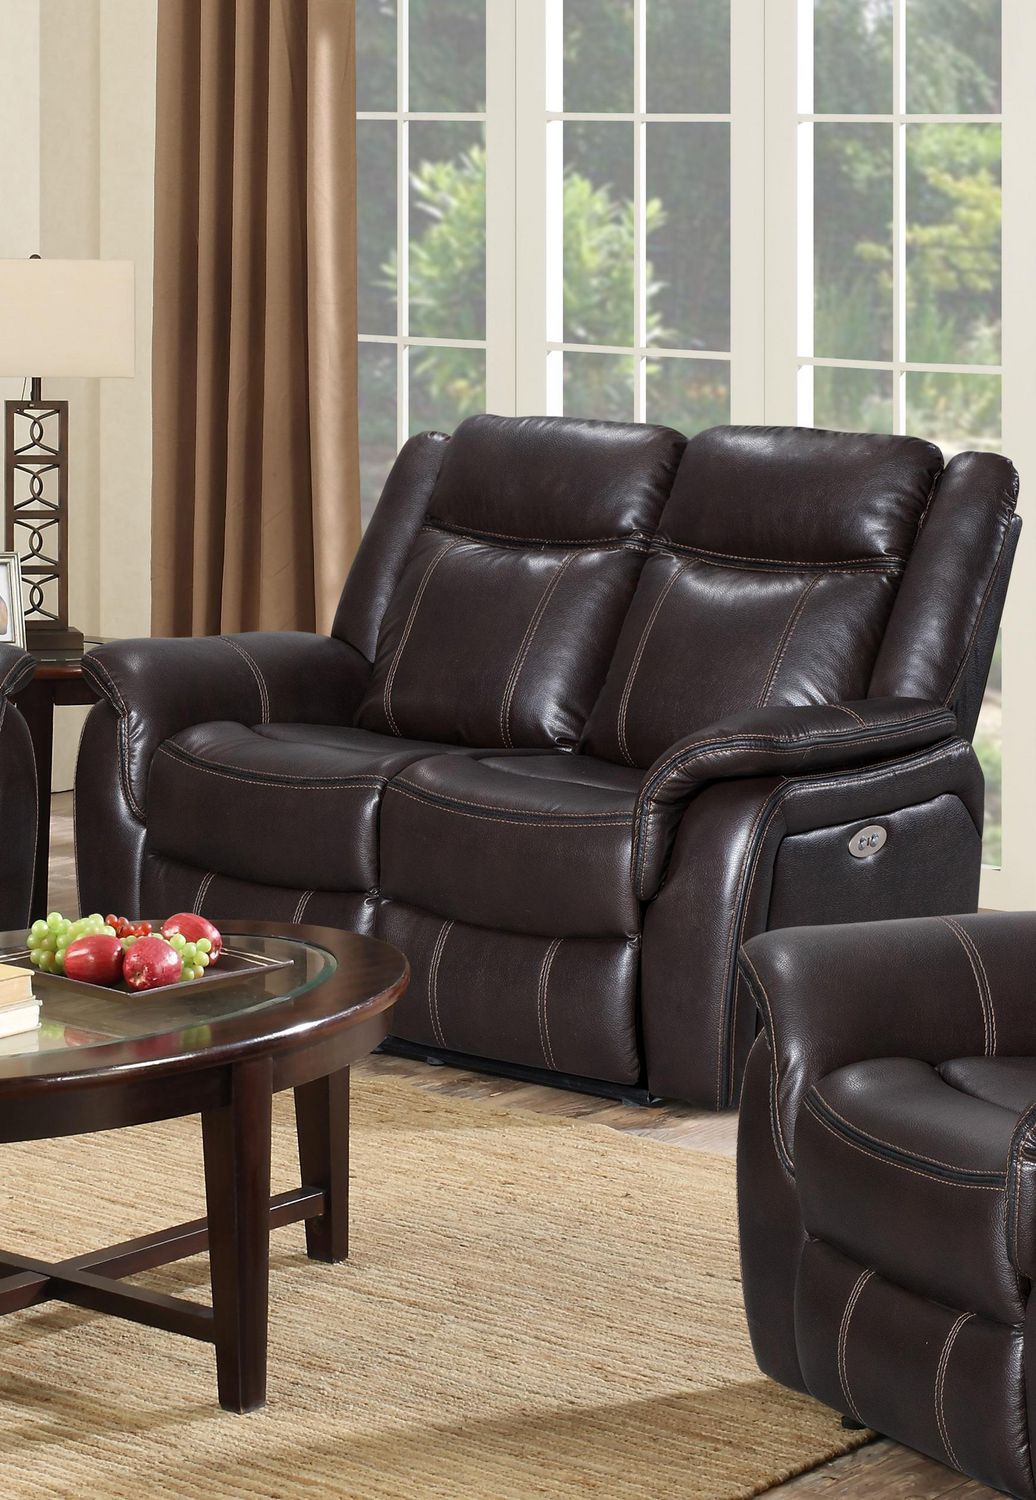 K Living Oscar Leathaire Power Recliner, Sawyer Leather Motion Sofa Costco